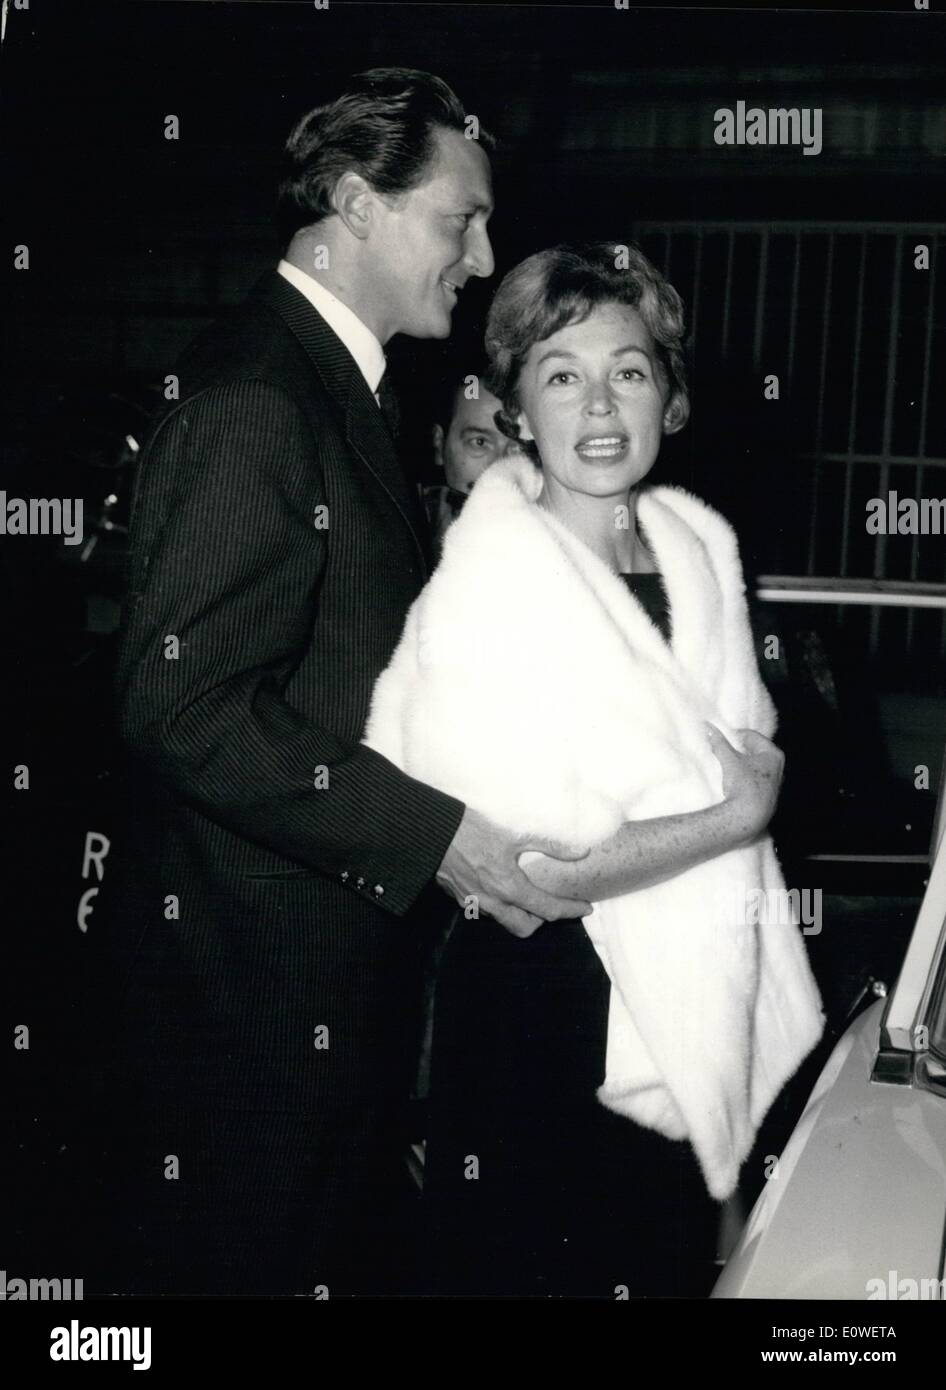 Oct. 10, 1962 - Last night big performances at Palazzo dello Sport of Moisseiev's ballet; present many actors, actress and political personalities. Photo shows German actress Lilli Palmer and her husband actor Carlos Thompson. Stock Photo